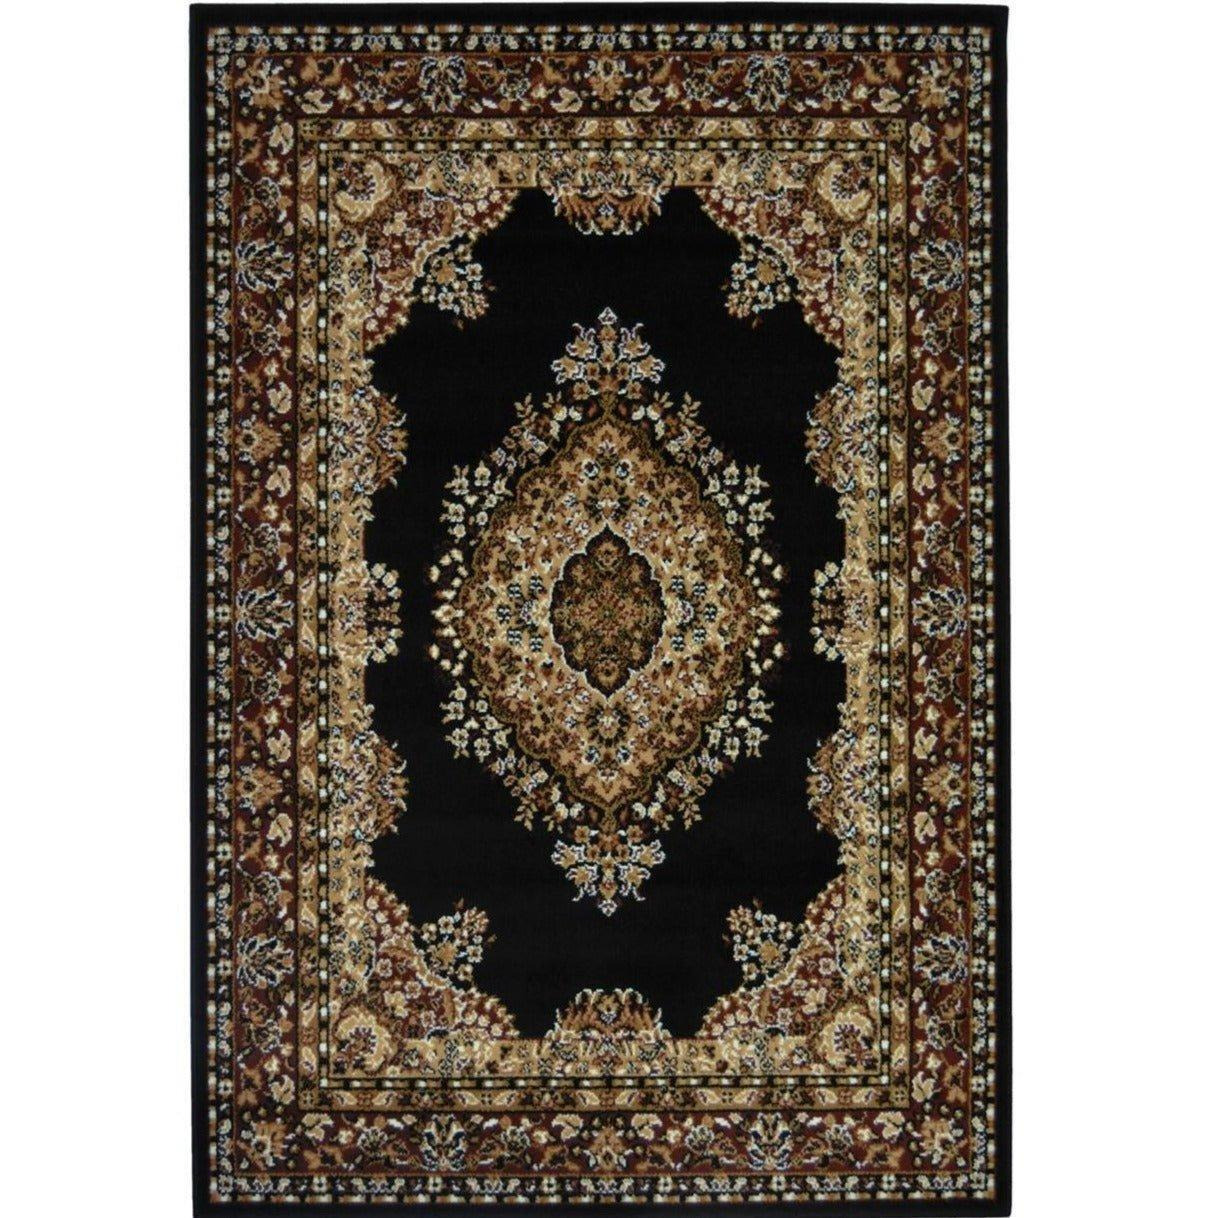 Maestro Collection Traditional Design Rug in Black - 4470 B11 - image 1